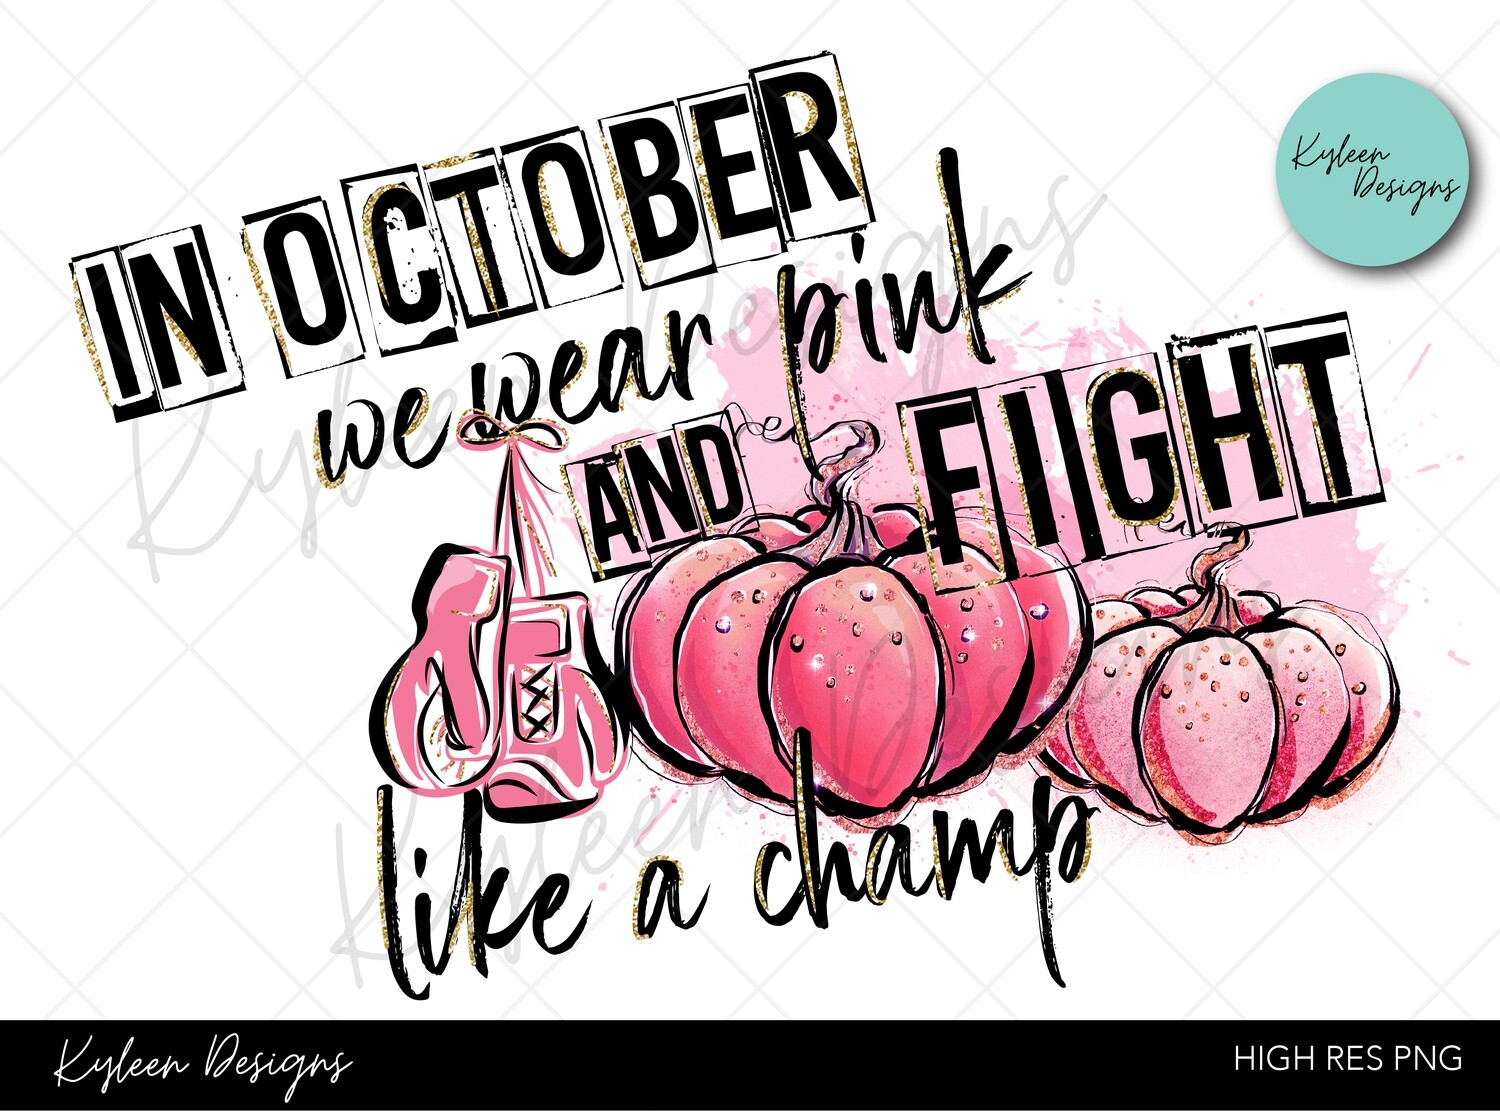 In October we wear pink high res PNG